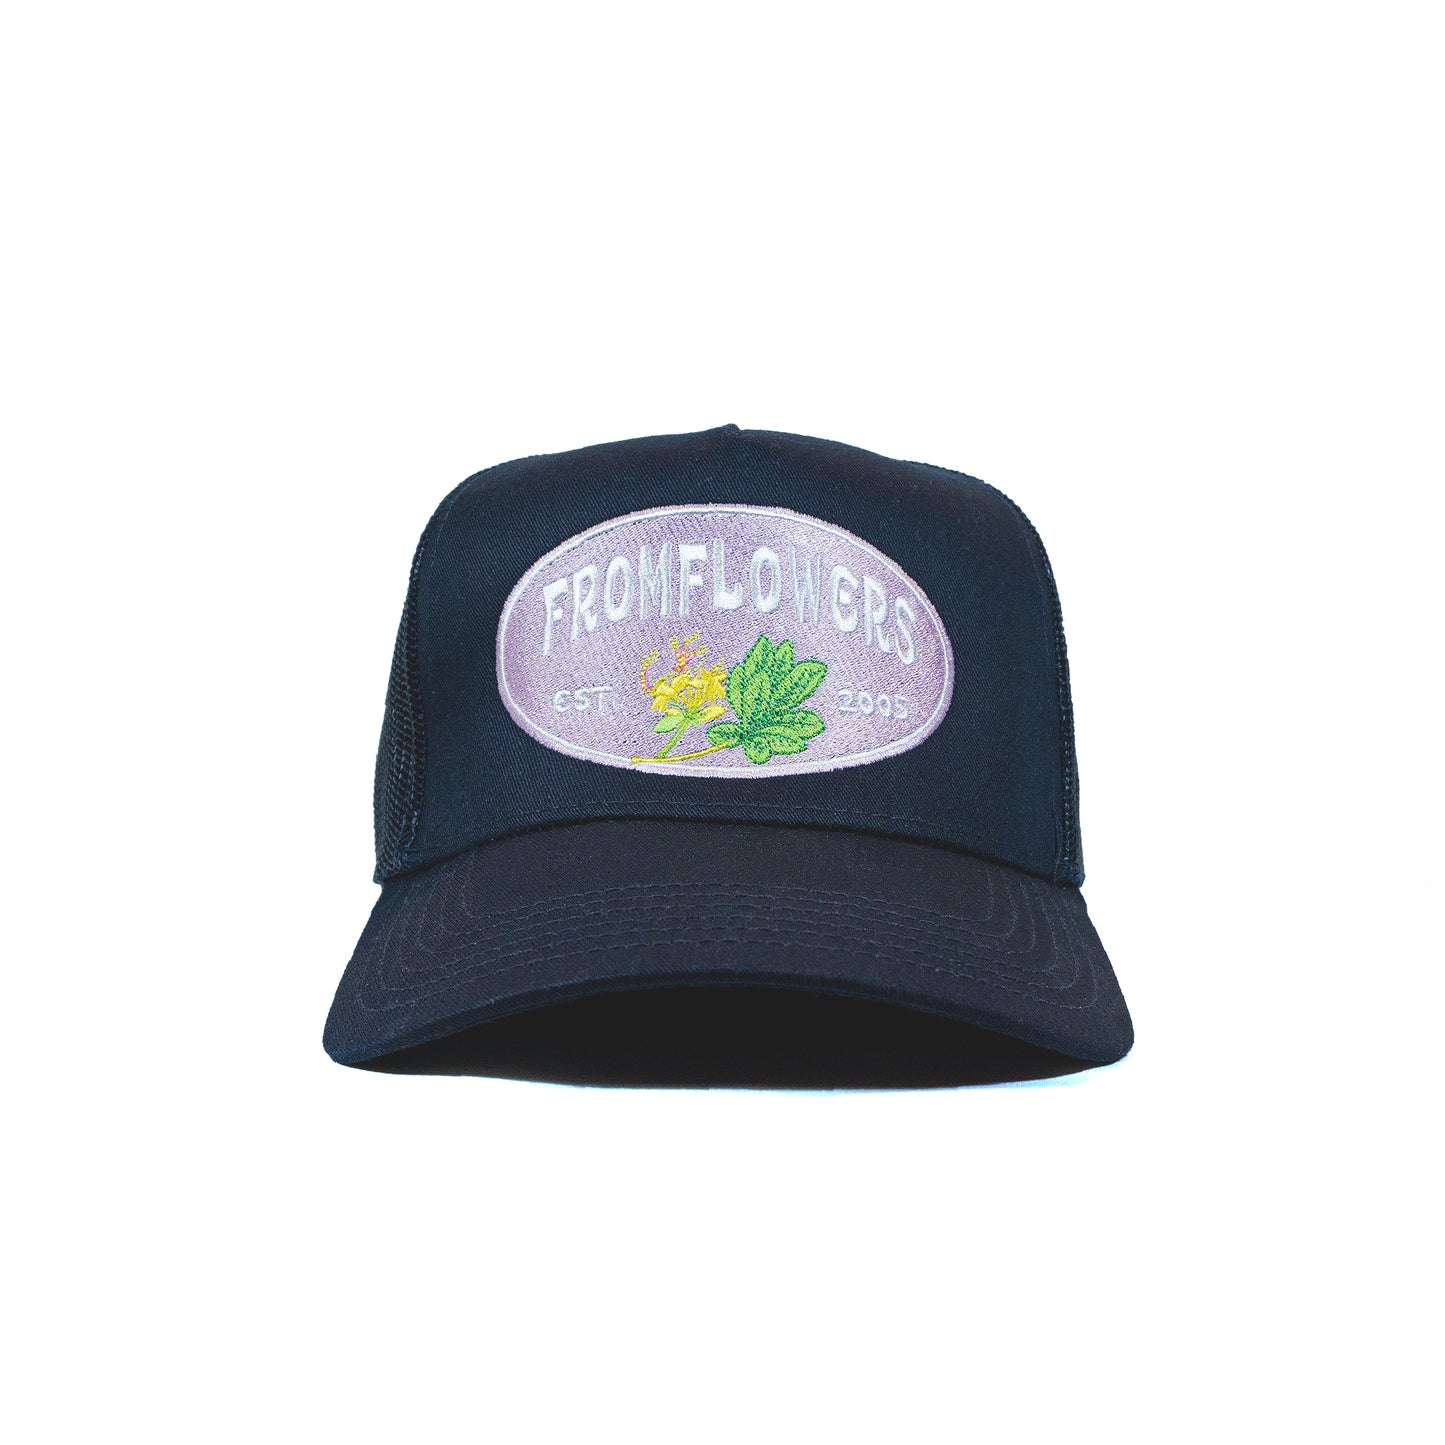 The Pacific Trucker Hat